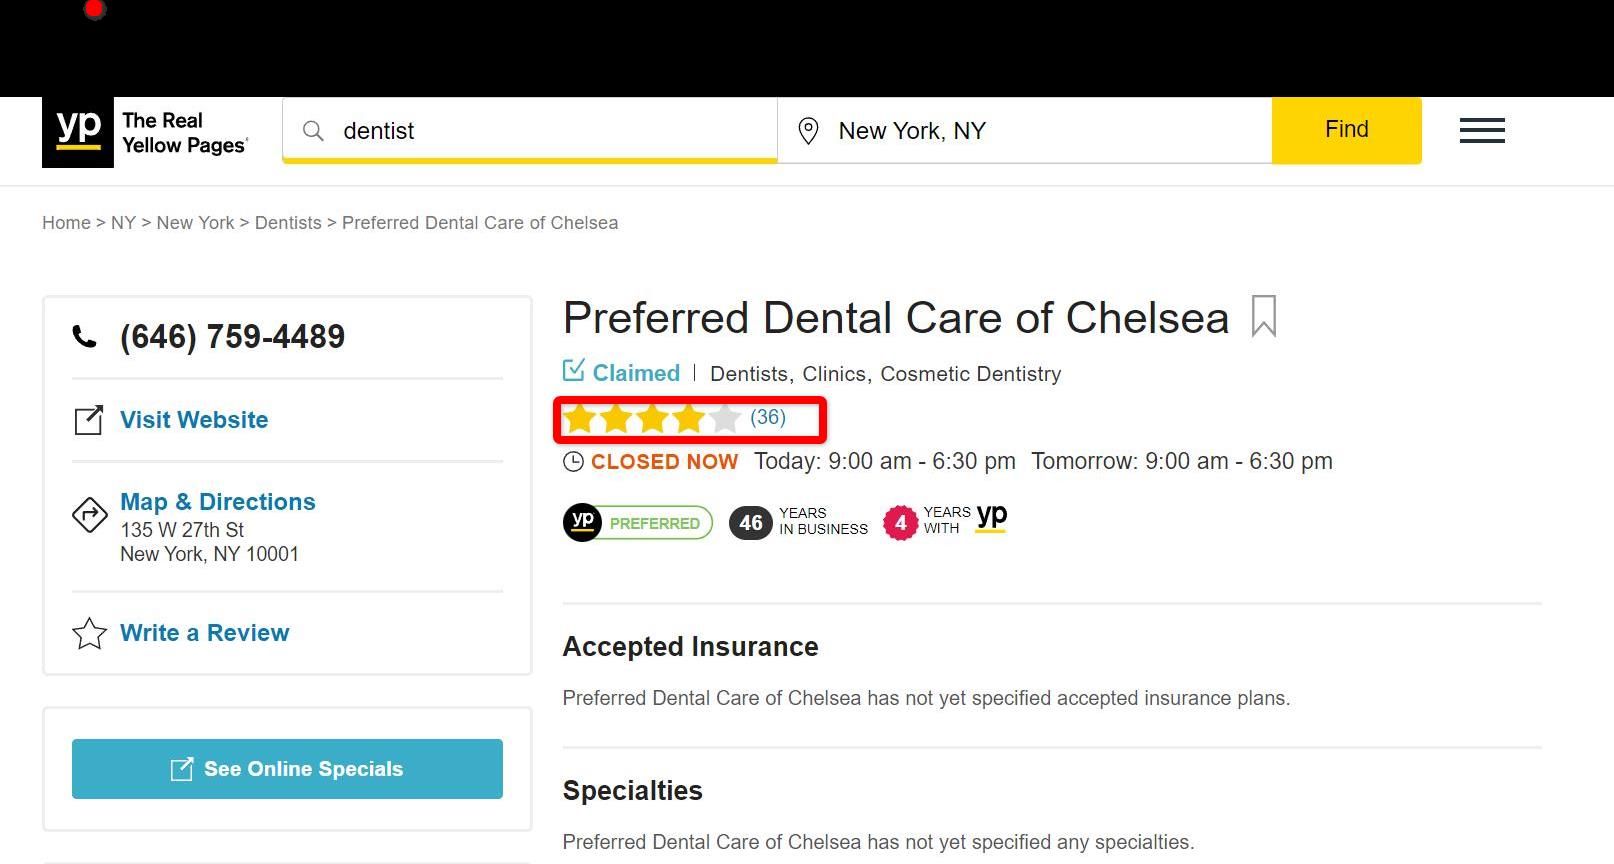 Dentist listed on the Yellow Pages